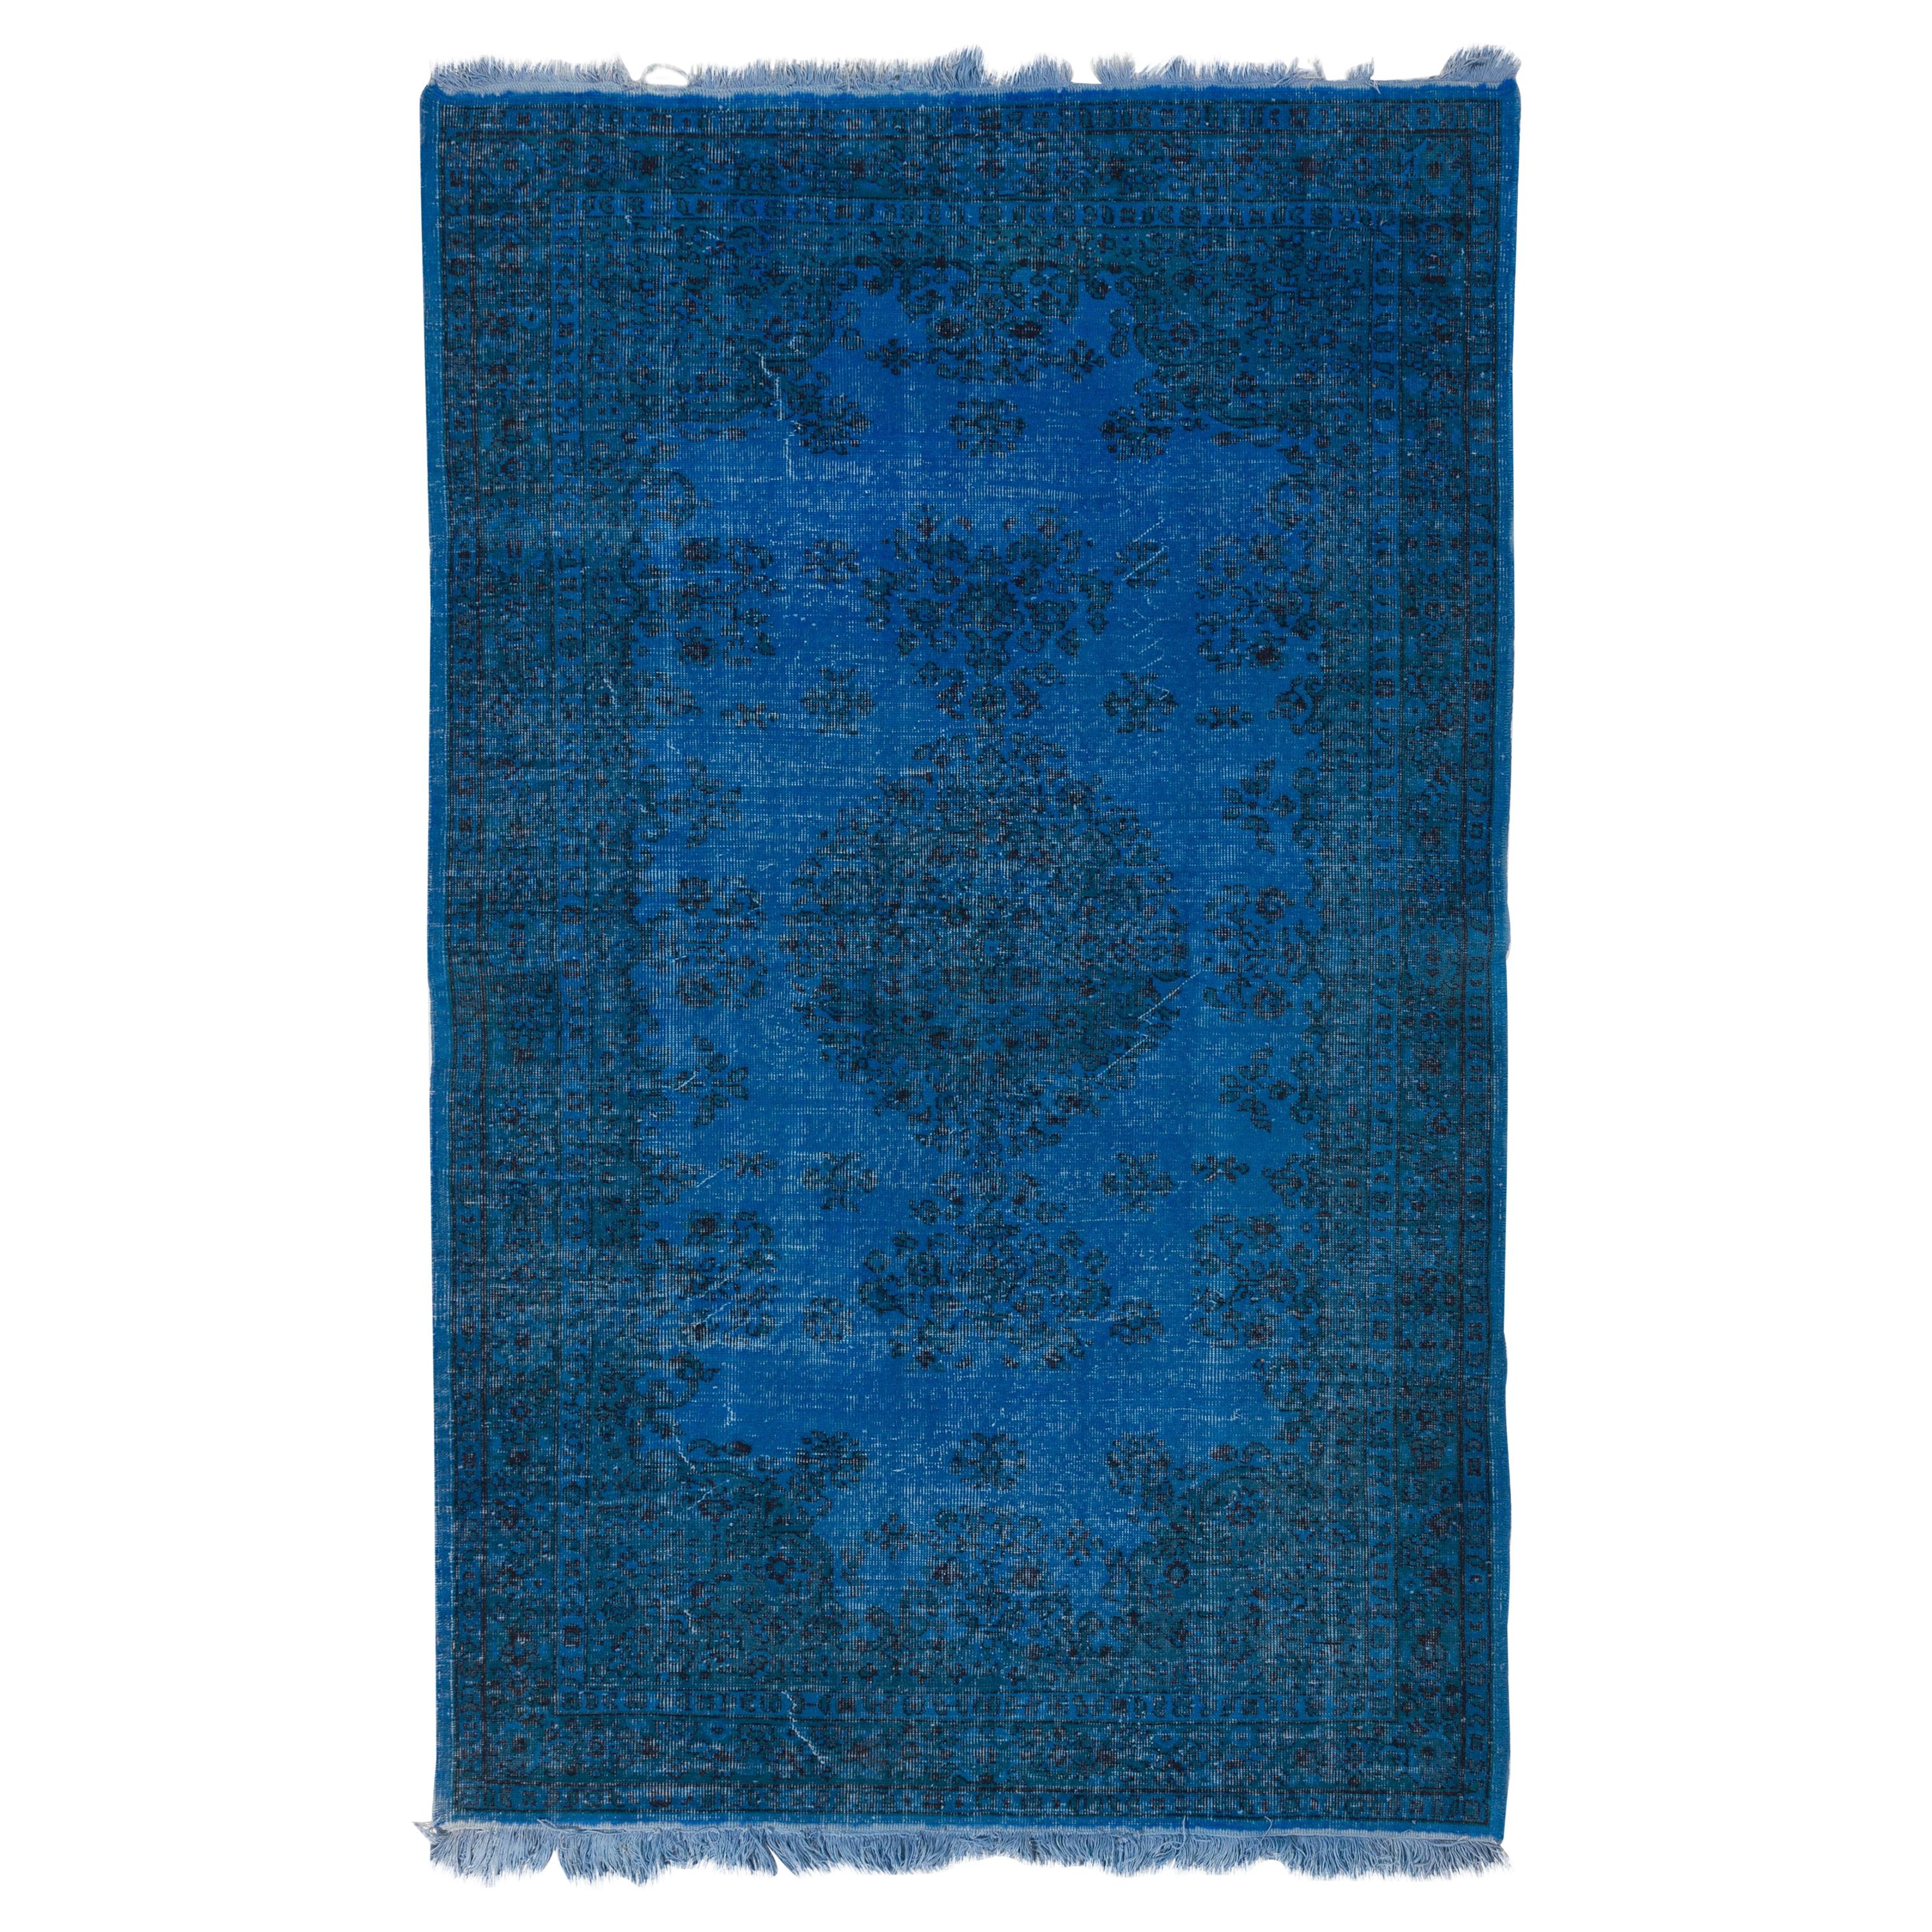 5.4x8.6 Ft Vintage Rug Over-Dyed in Blue Color, Ideal for Contemporary Interiors